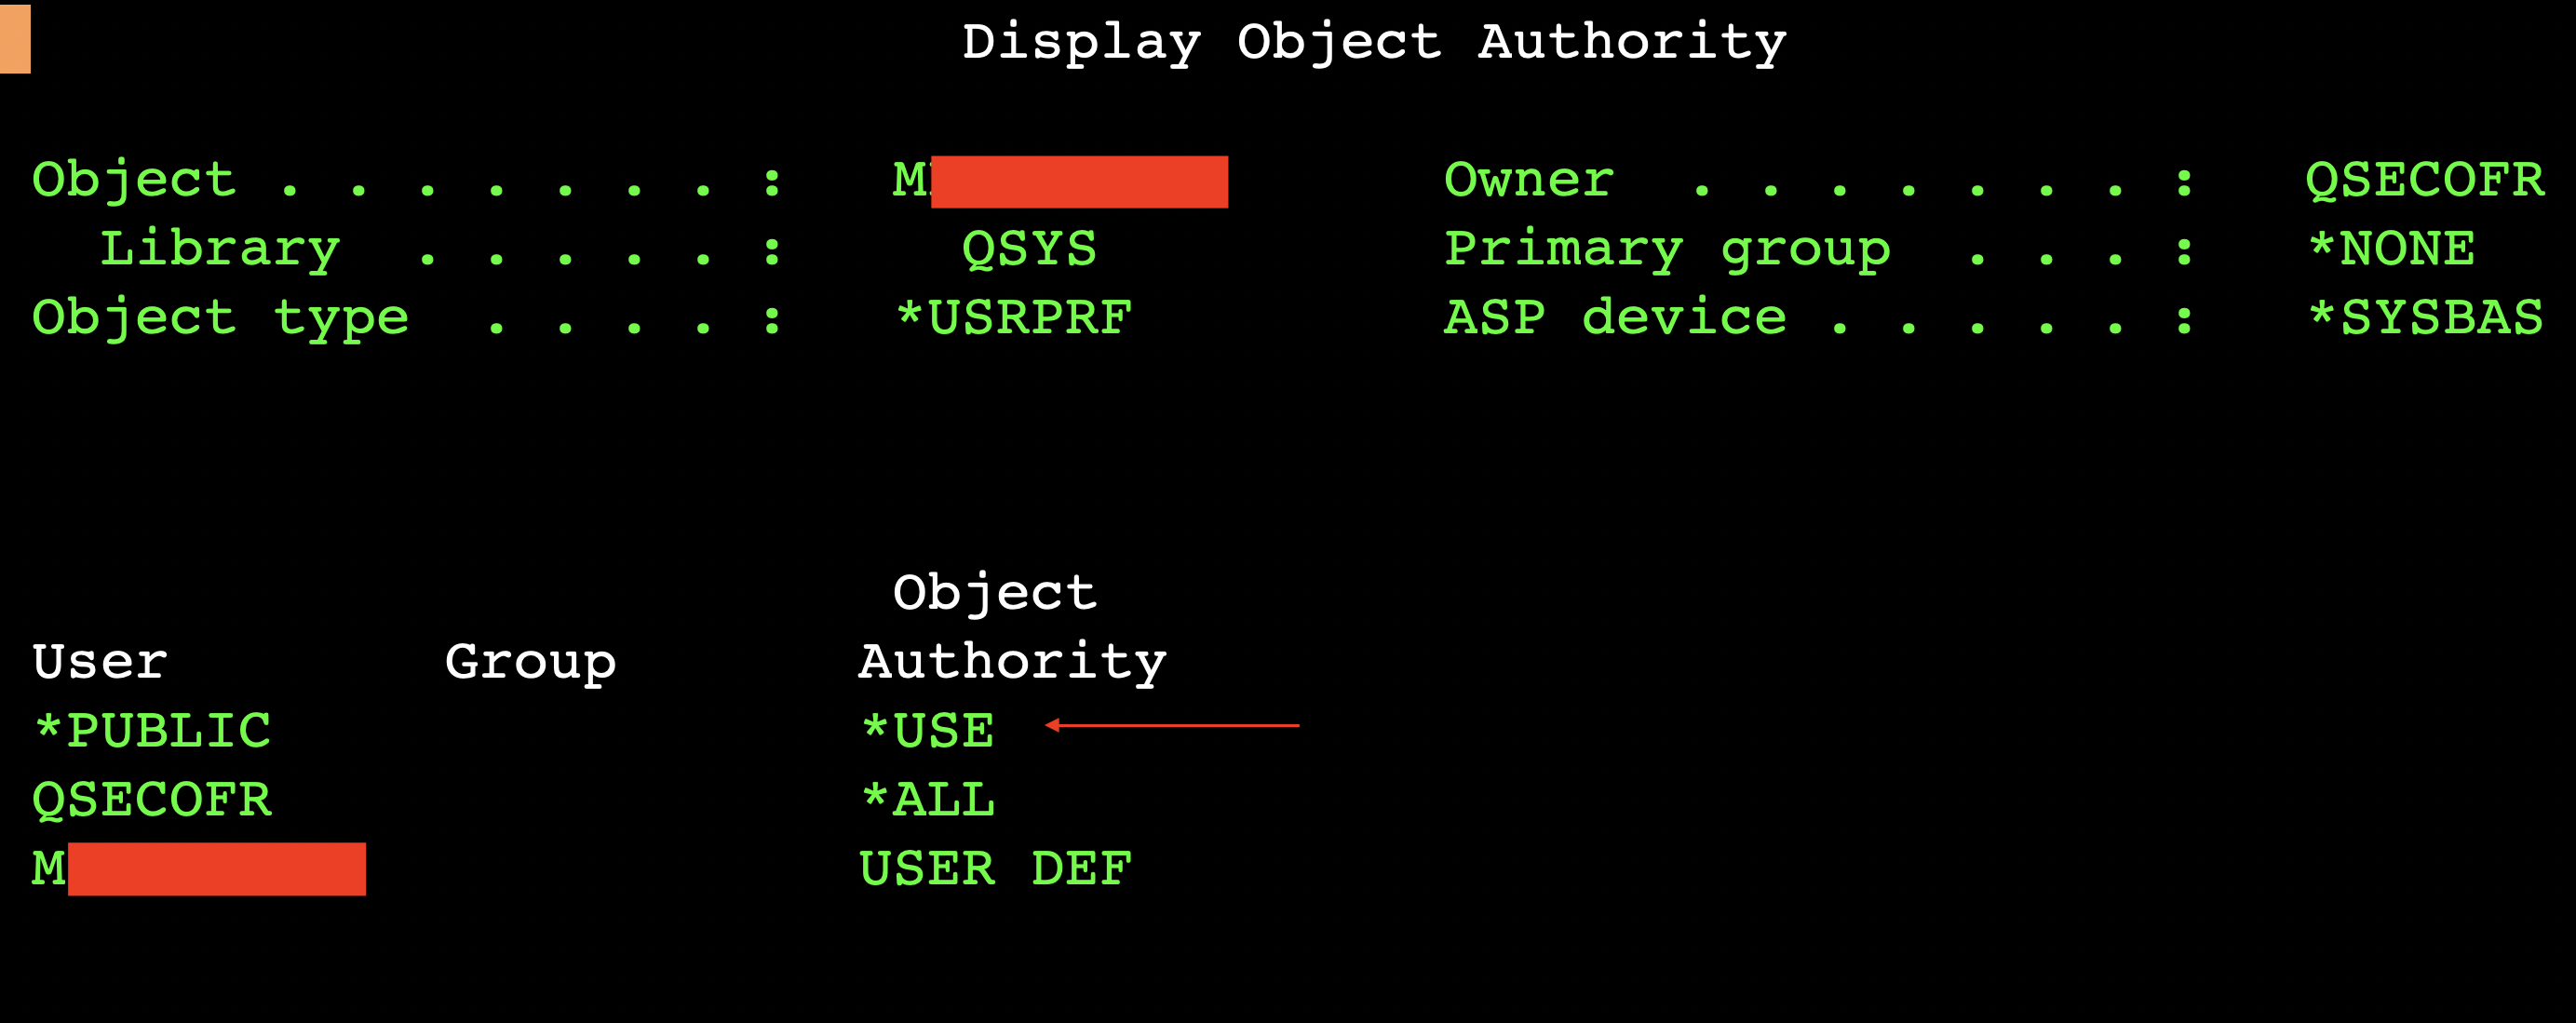 Object Authority of the target high-privileged profile